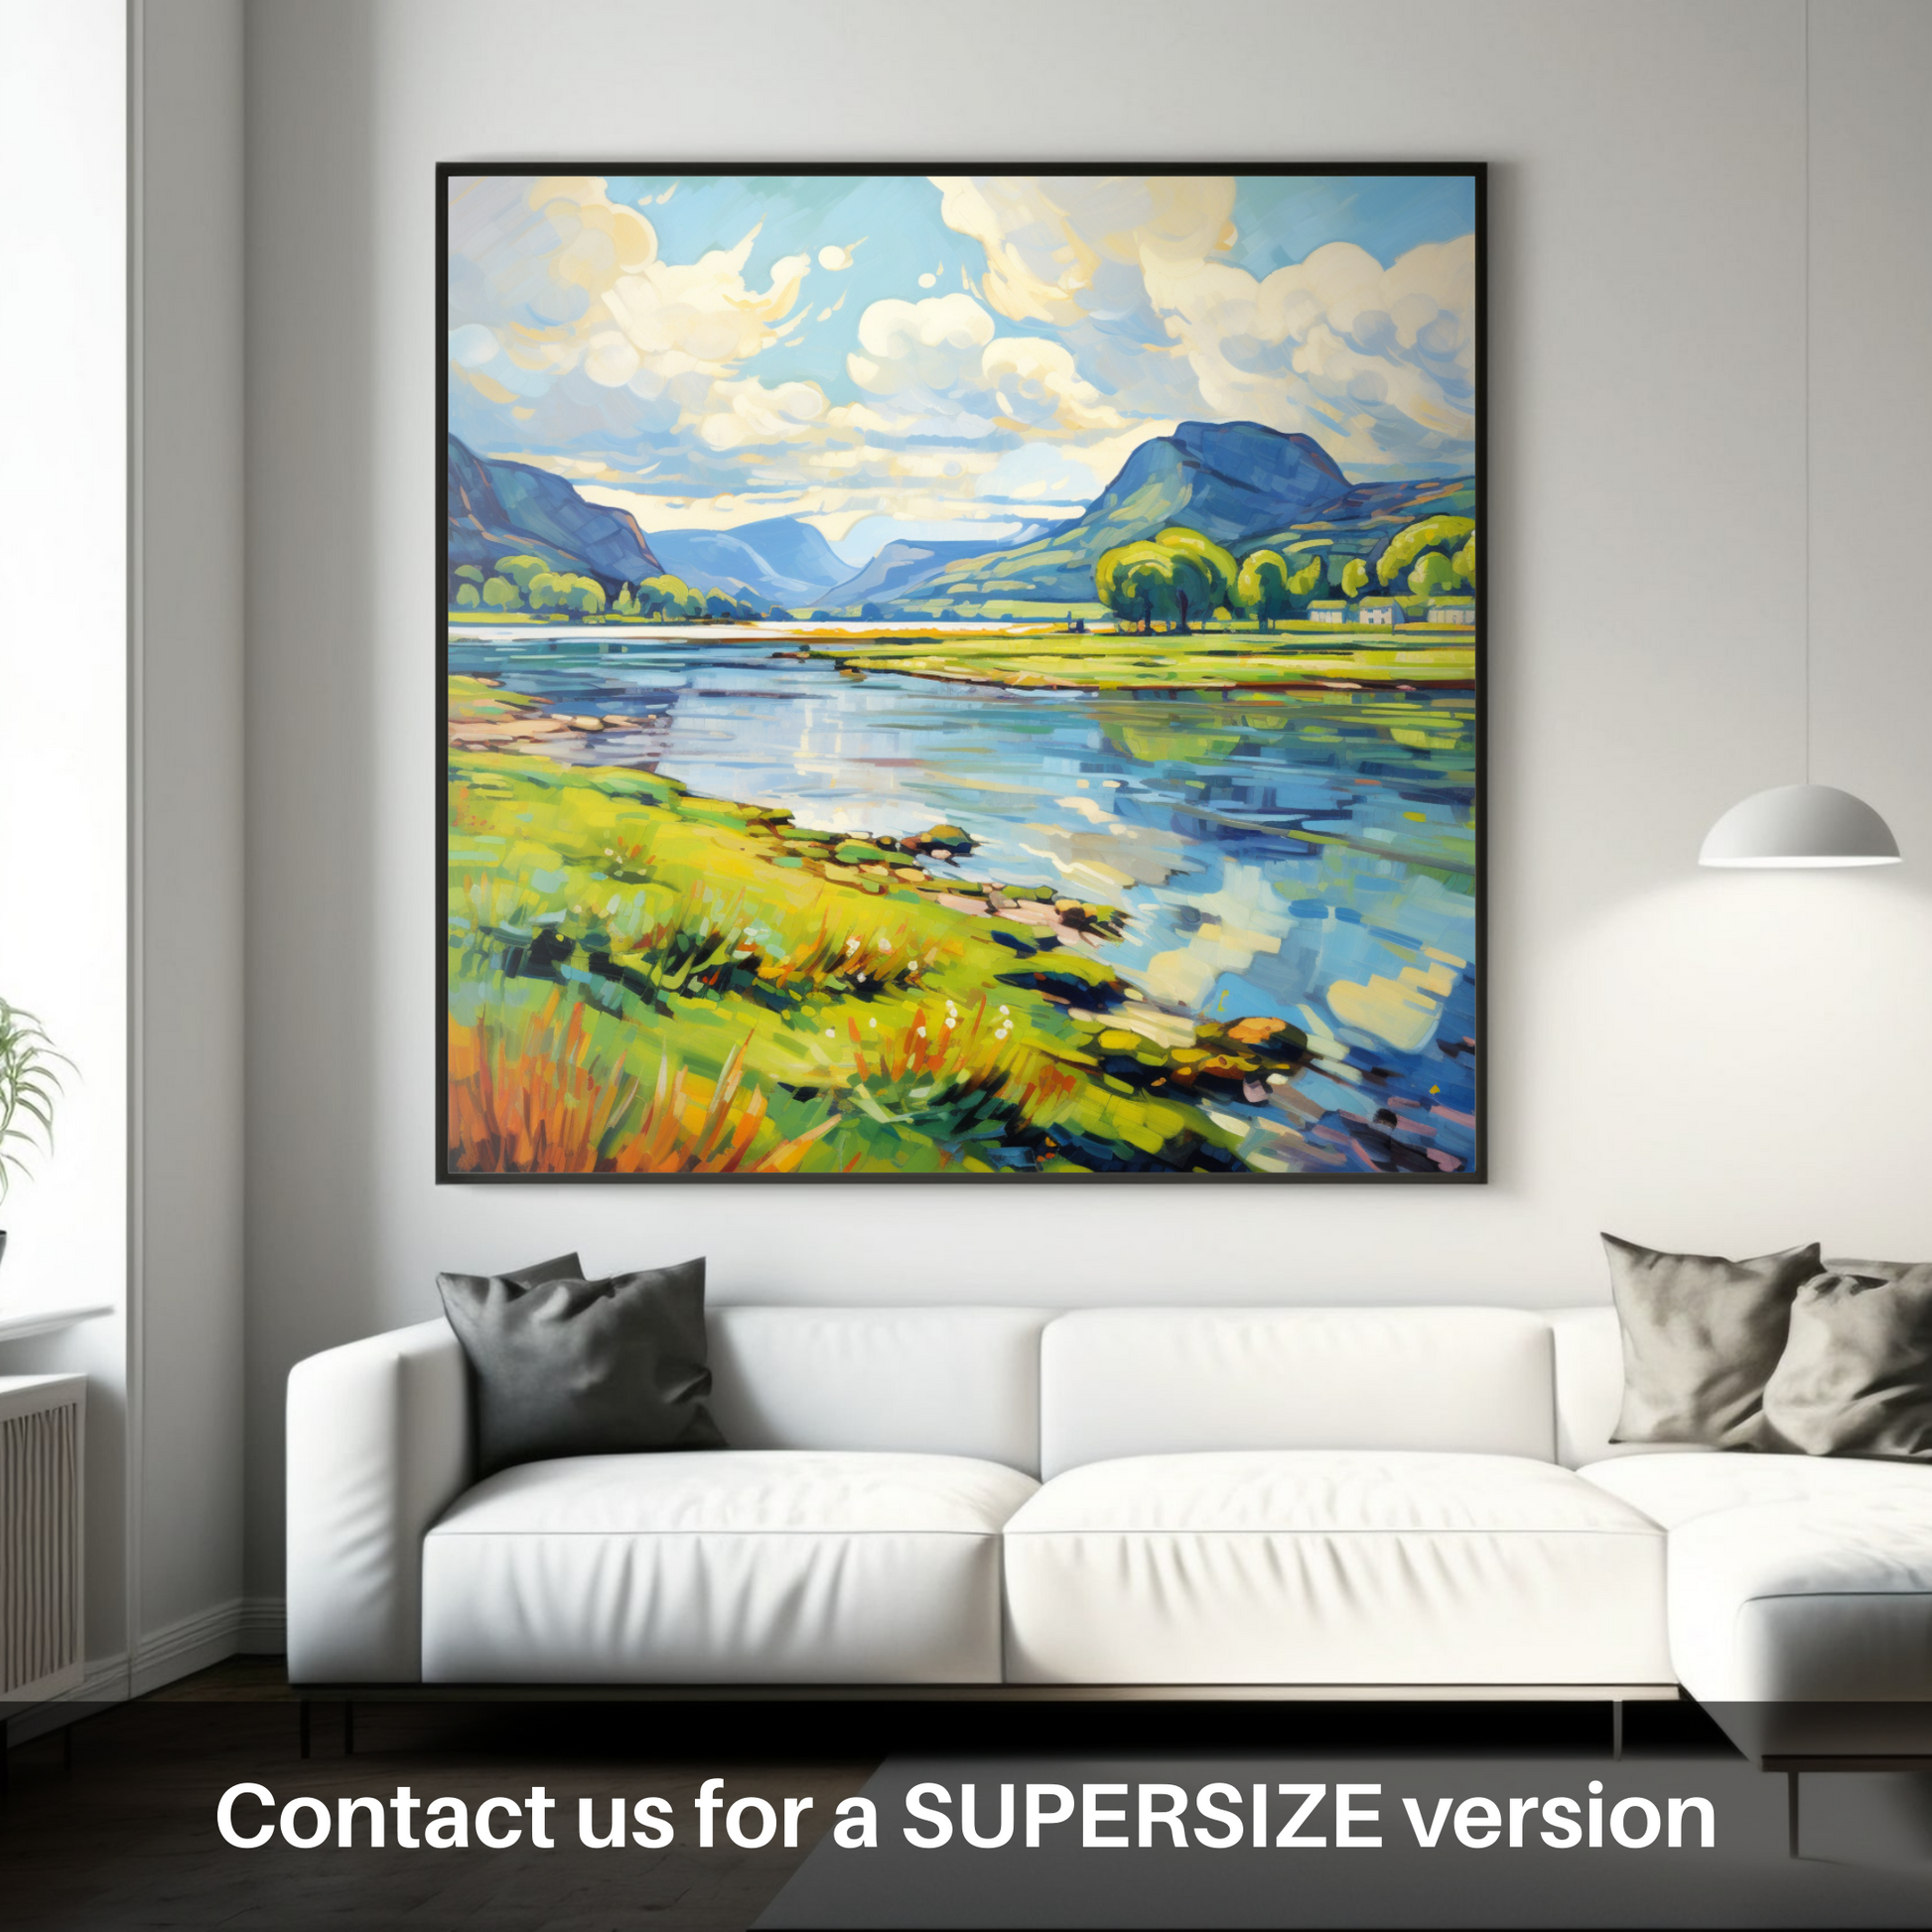 Huge supersize print of Loch Leven, Perth and Kinross in summer